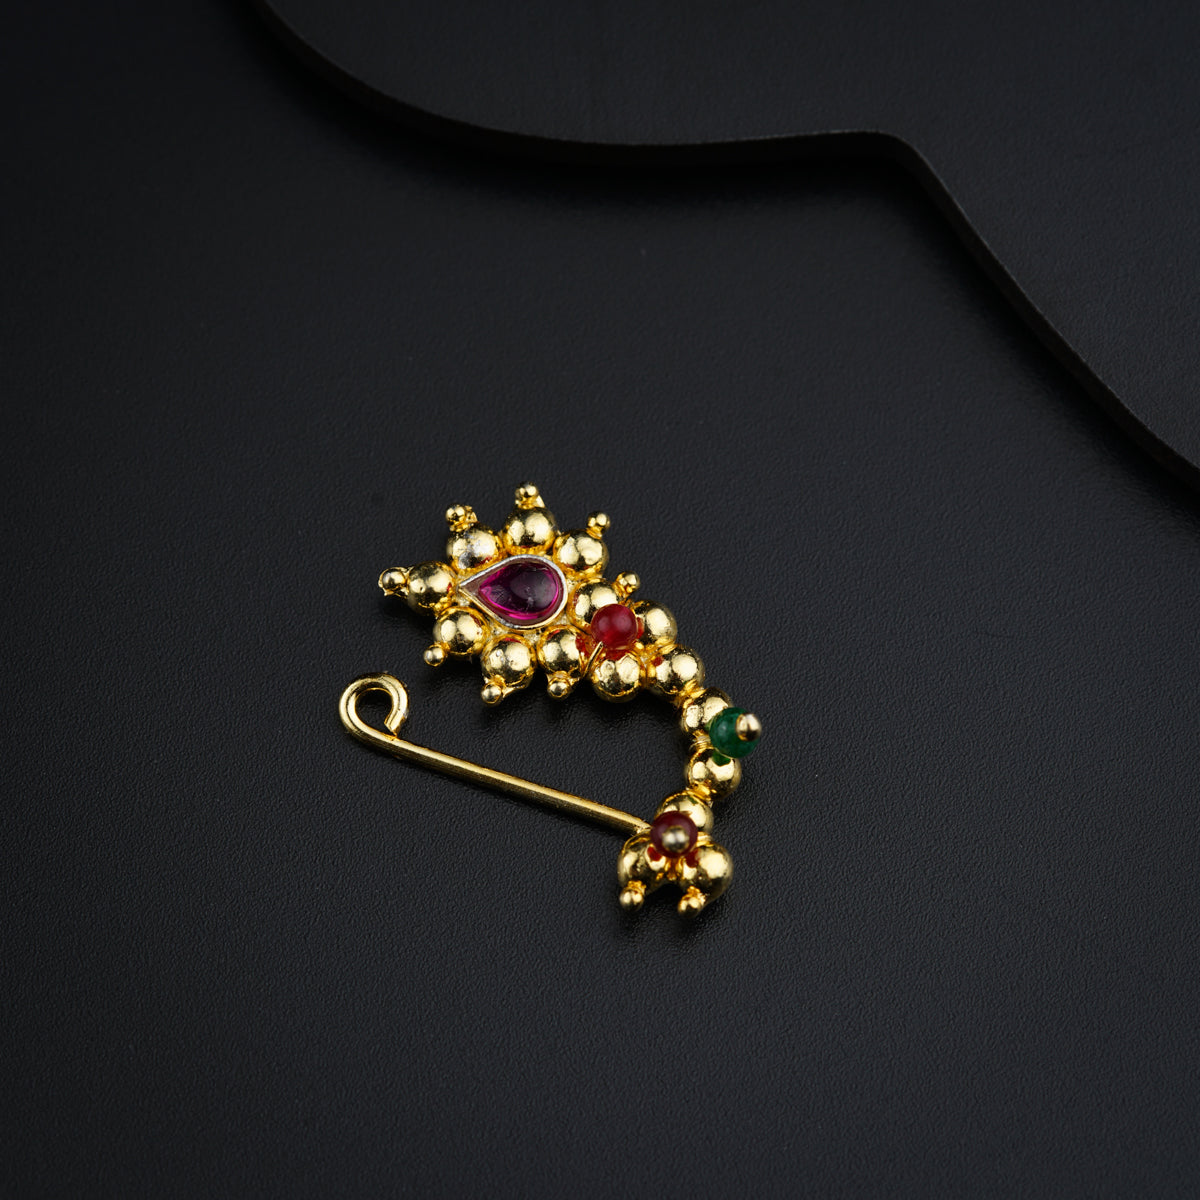 a gold brooch with a red and green stone